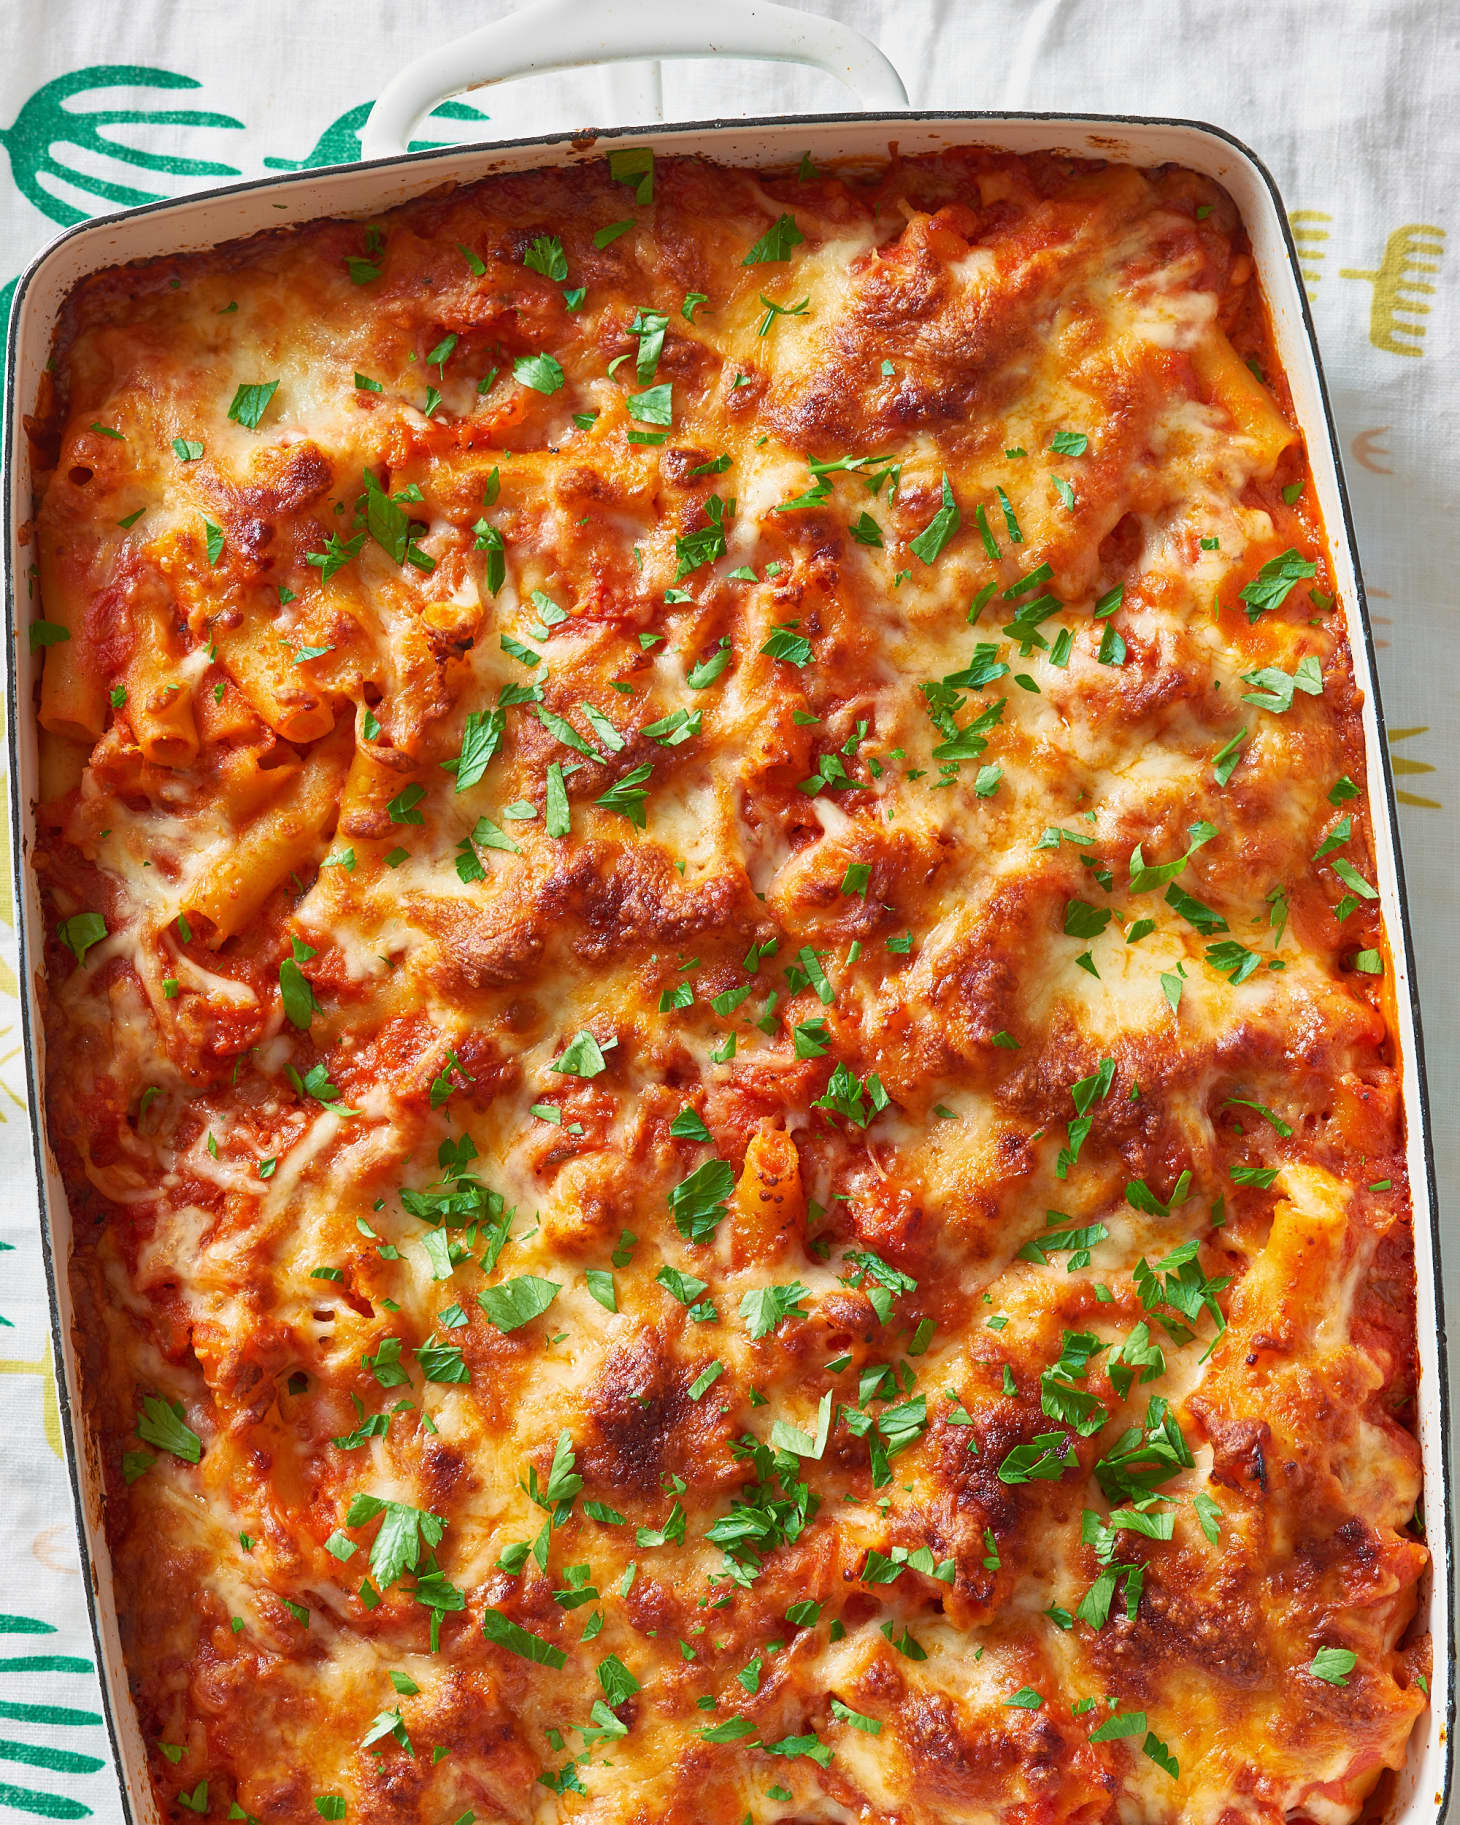 How To Make an All-Star Baked Ziti | Kitchn